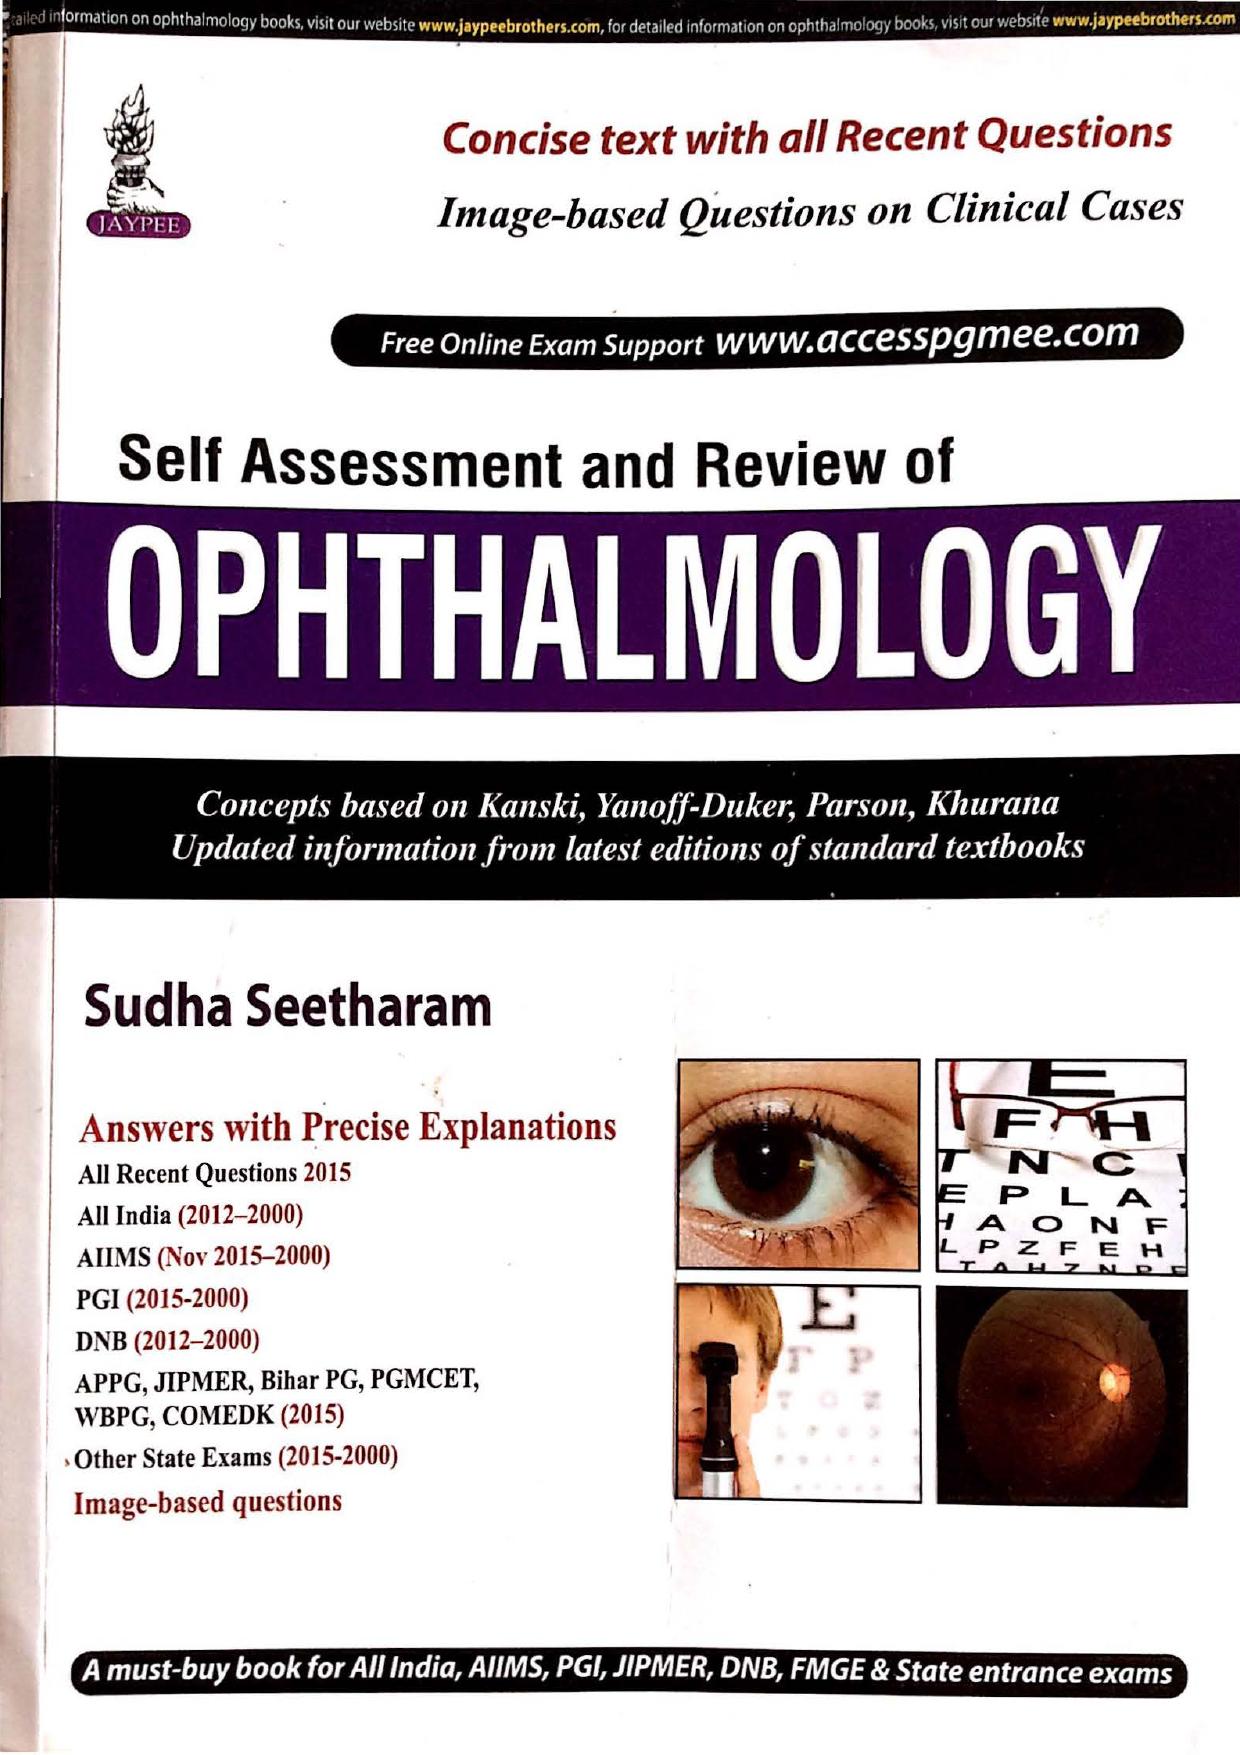 Self assessment and review of ophthalmology 2016